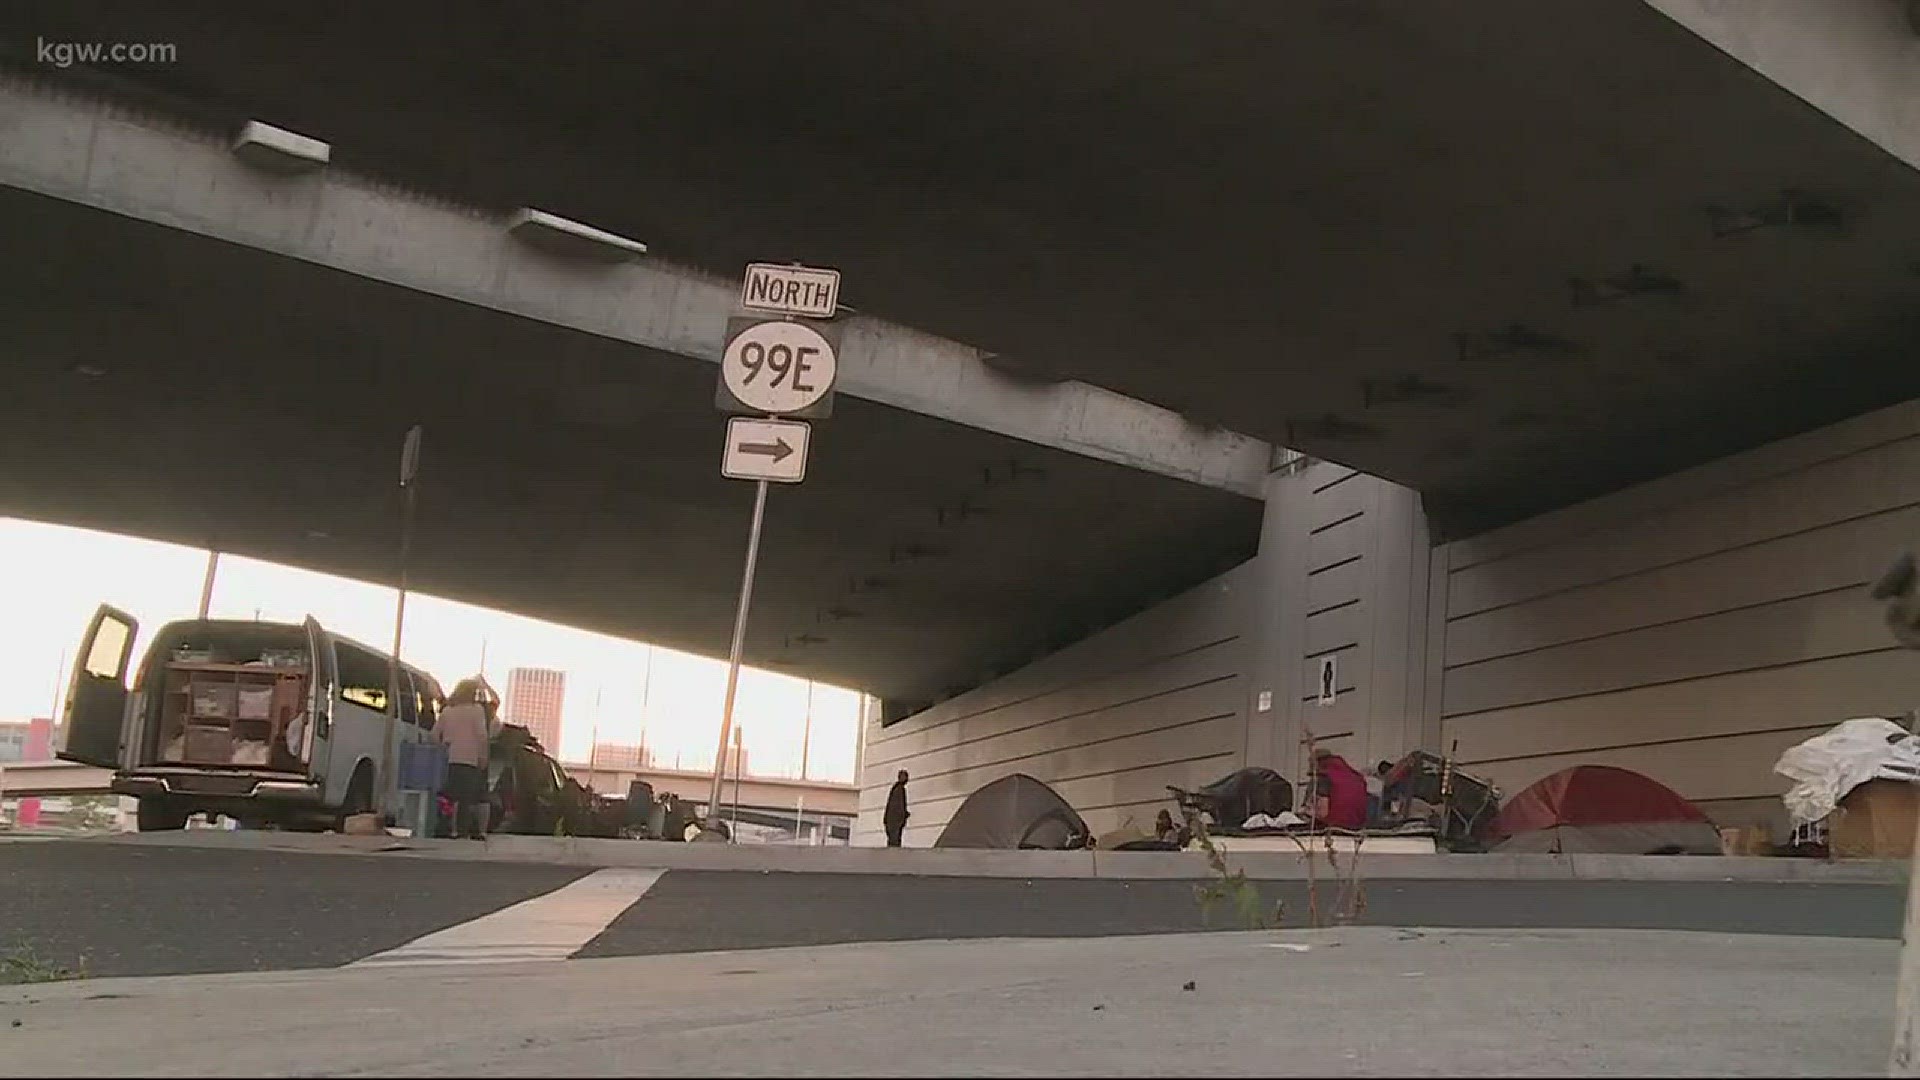 A report says 80 homeless people died in Multnomah County in 2016.